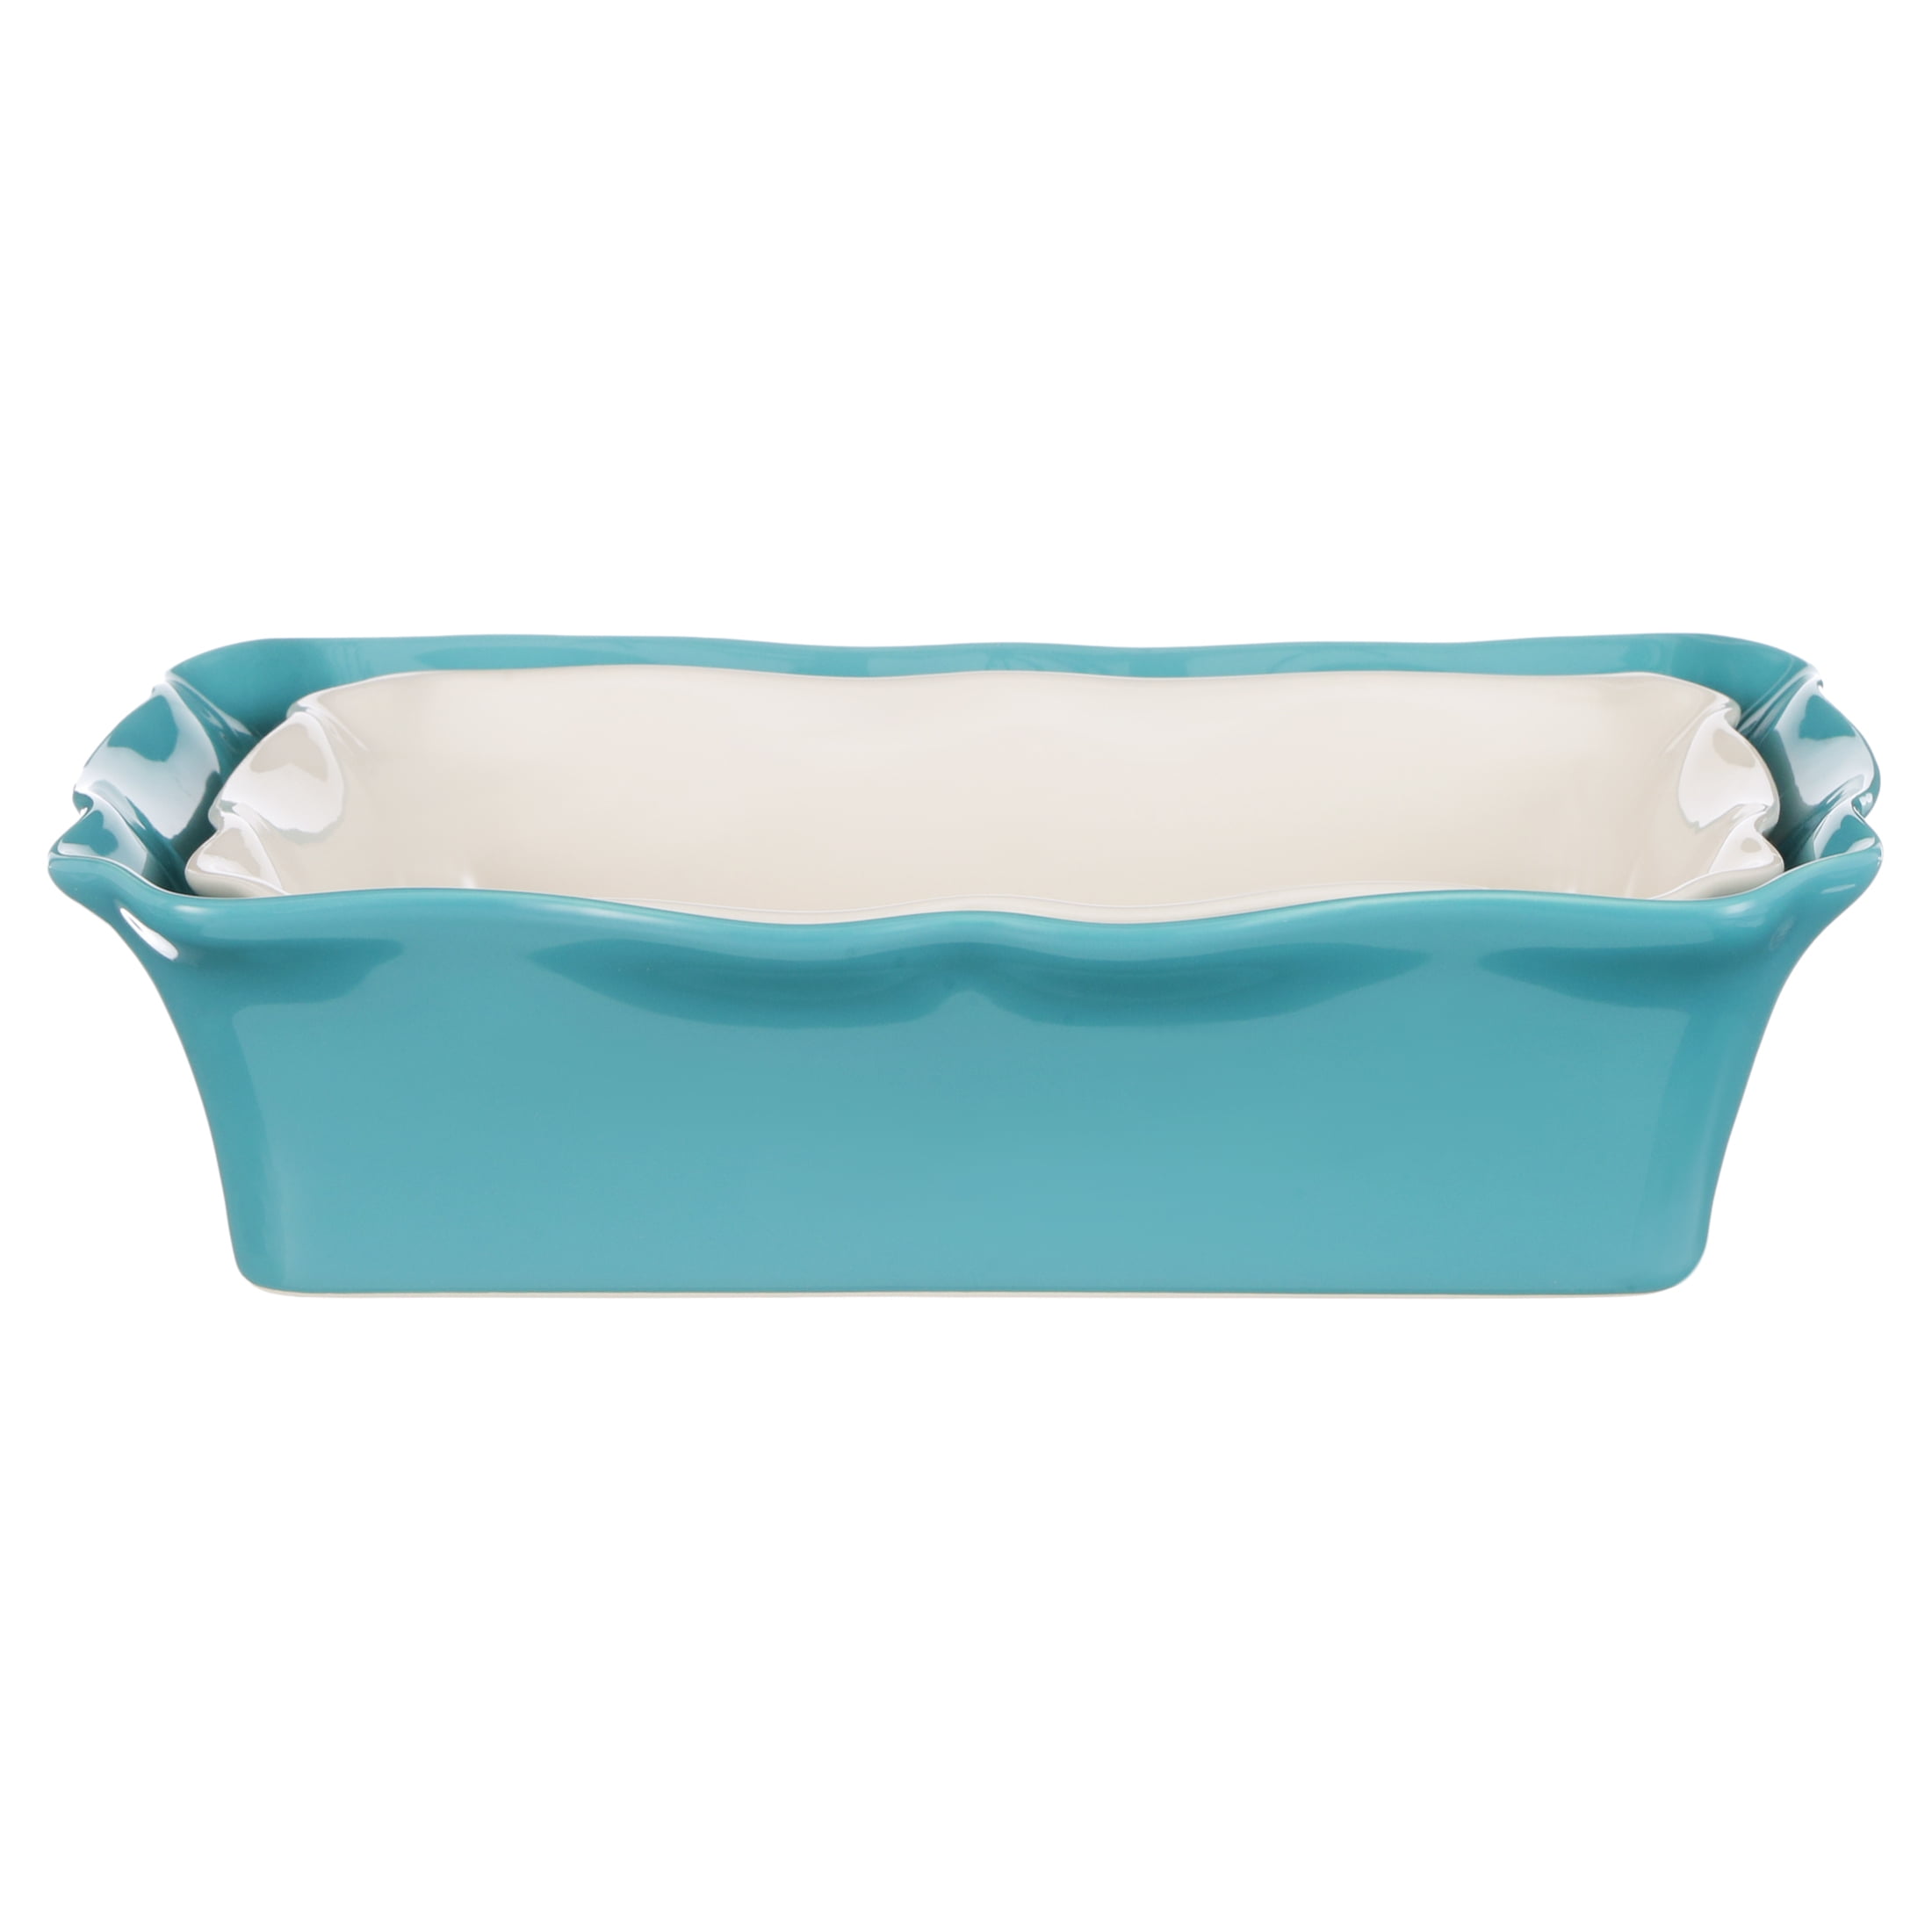 The Pioneer Woman Merry Meadows 2-Piece Rectangular Ceramic Holiday Bakeware Set, Size: Assorted